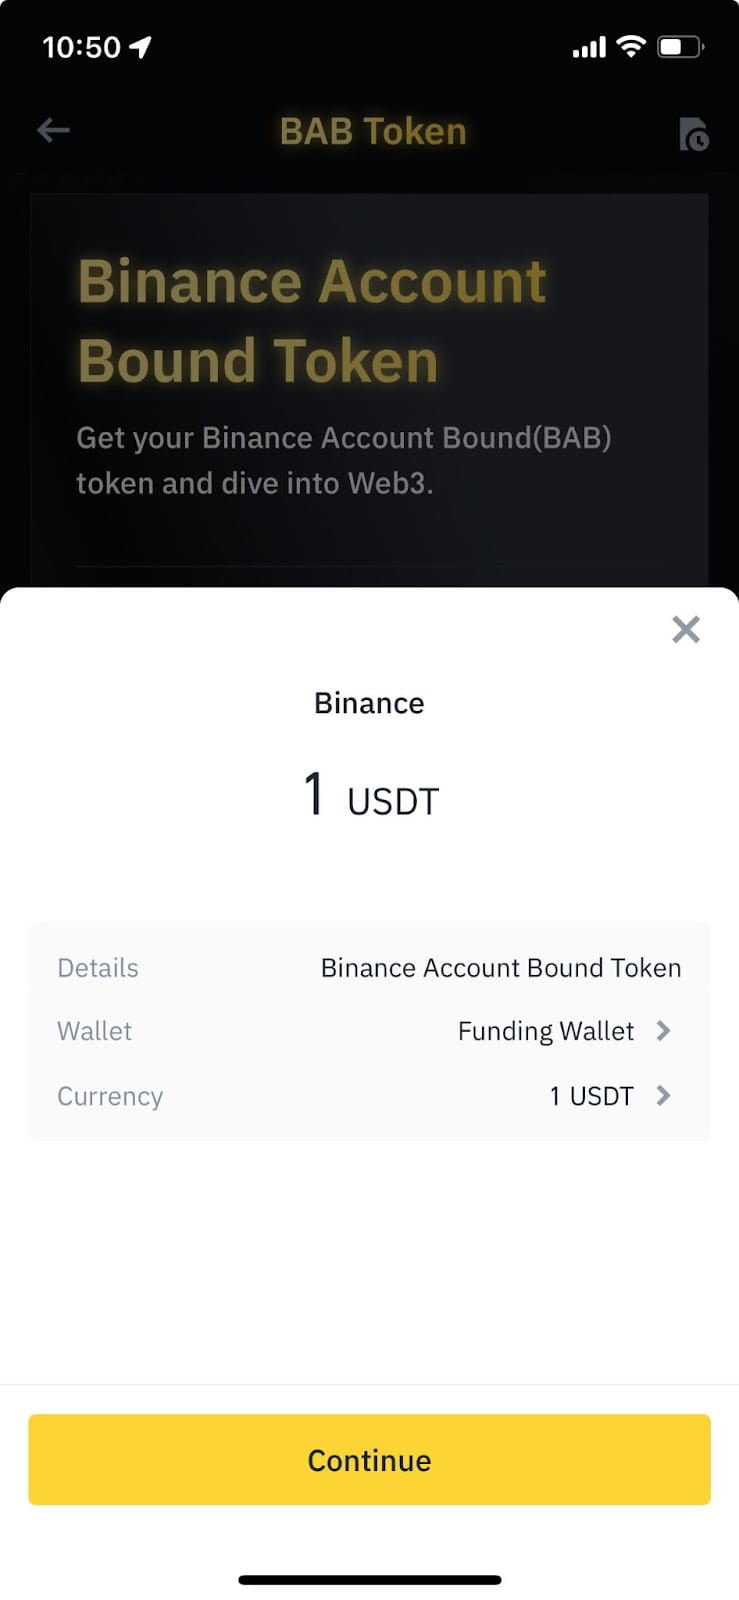 An Overview of Binance Account Bound (BAB)